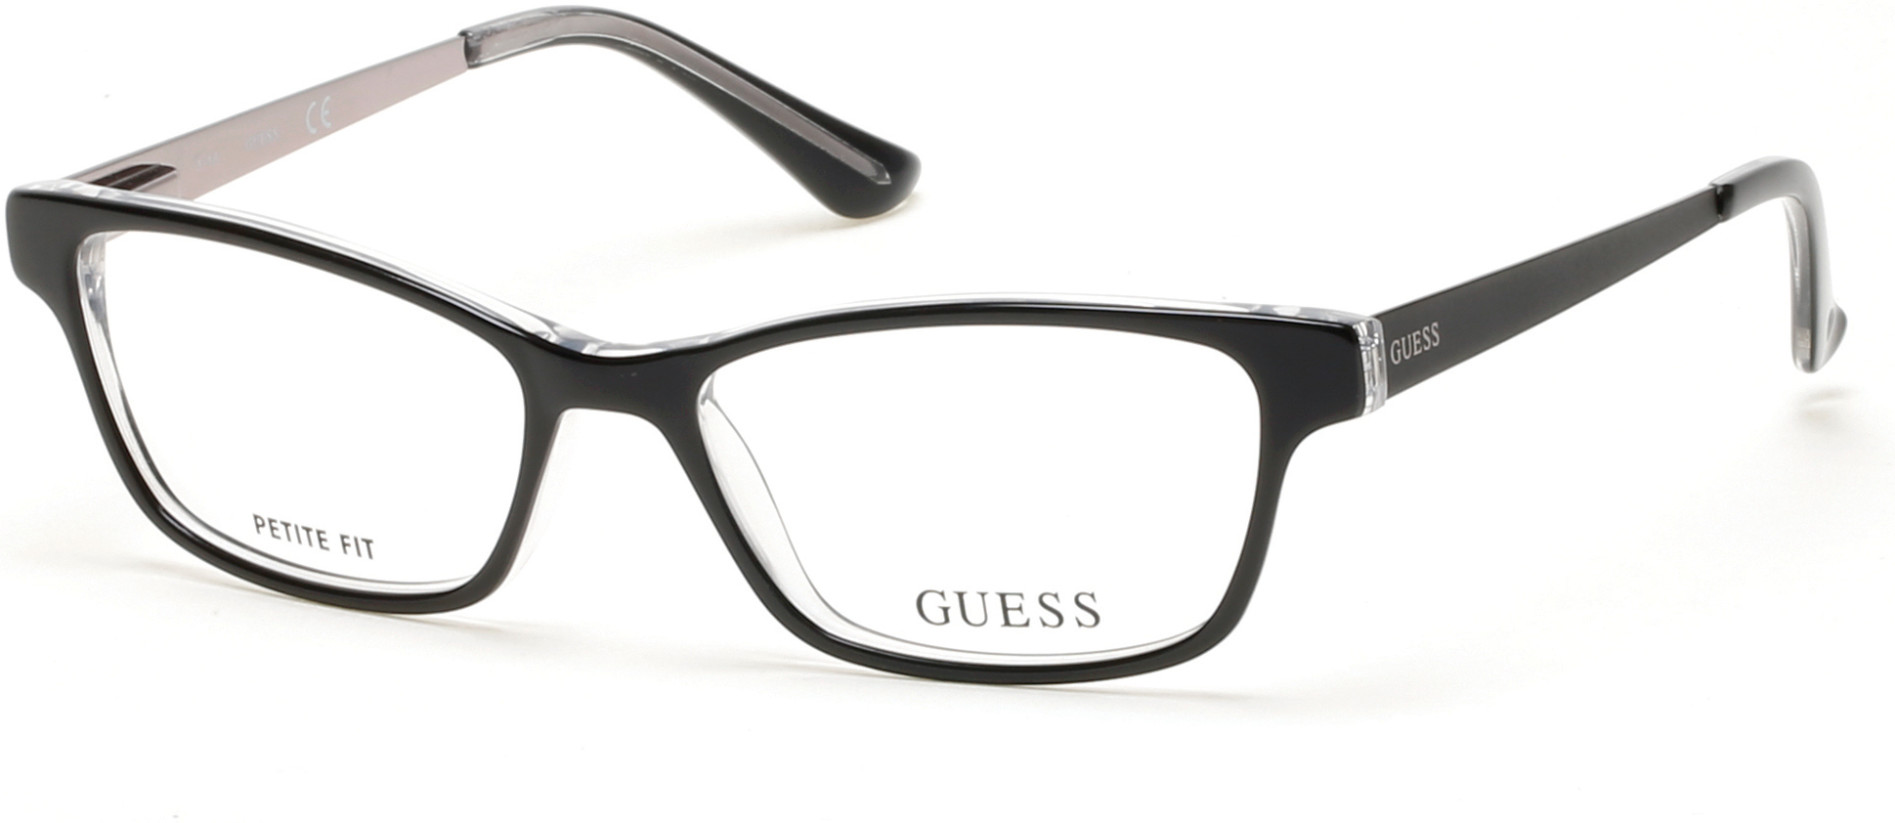 GUESS 2538 003